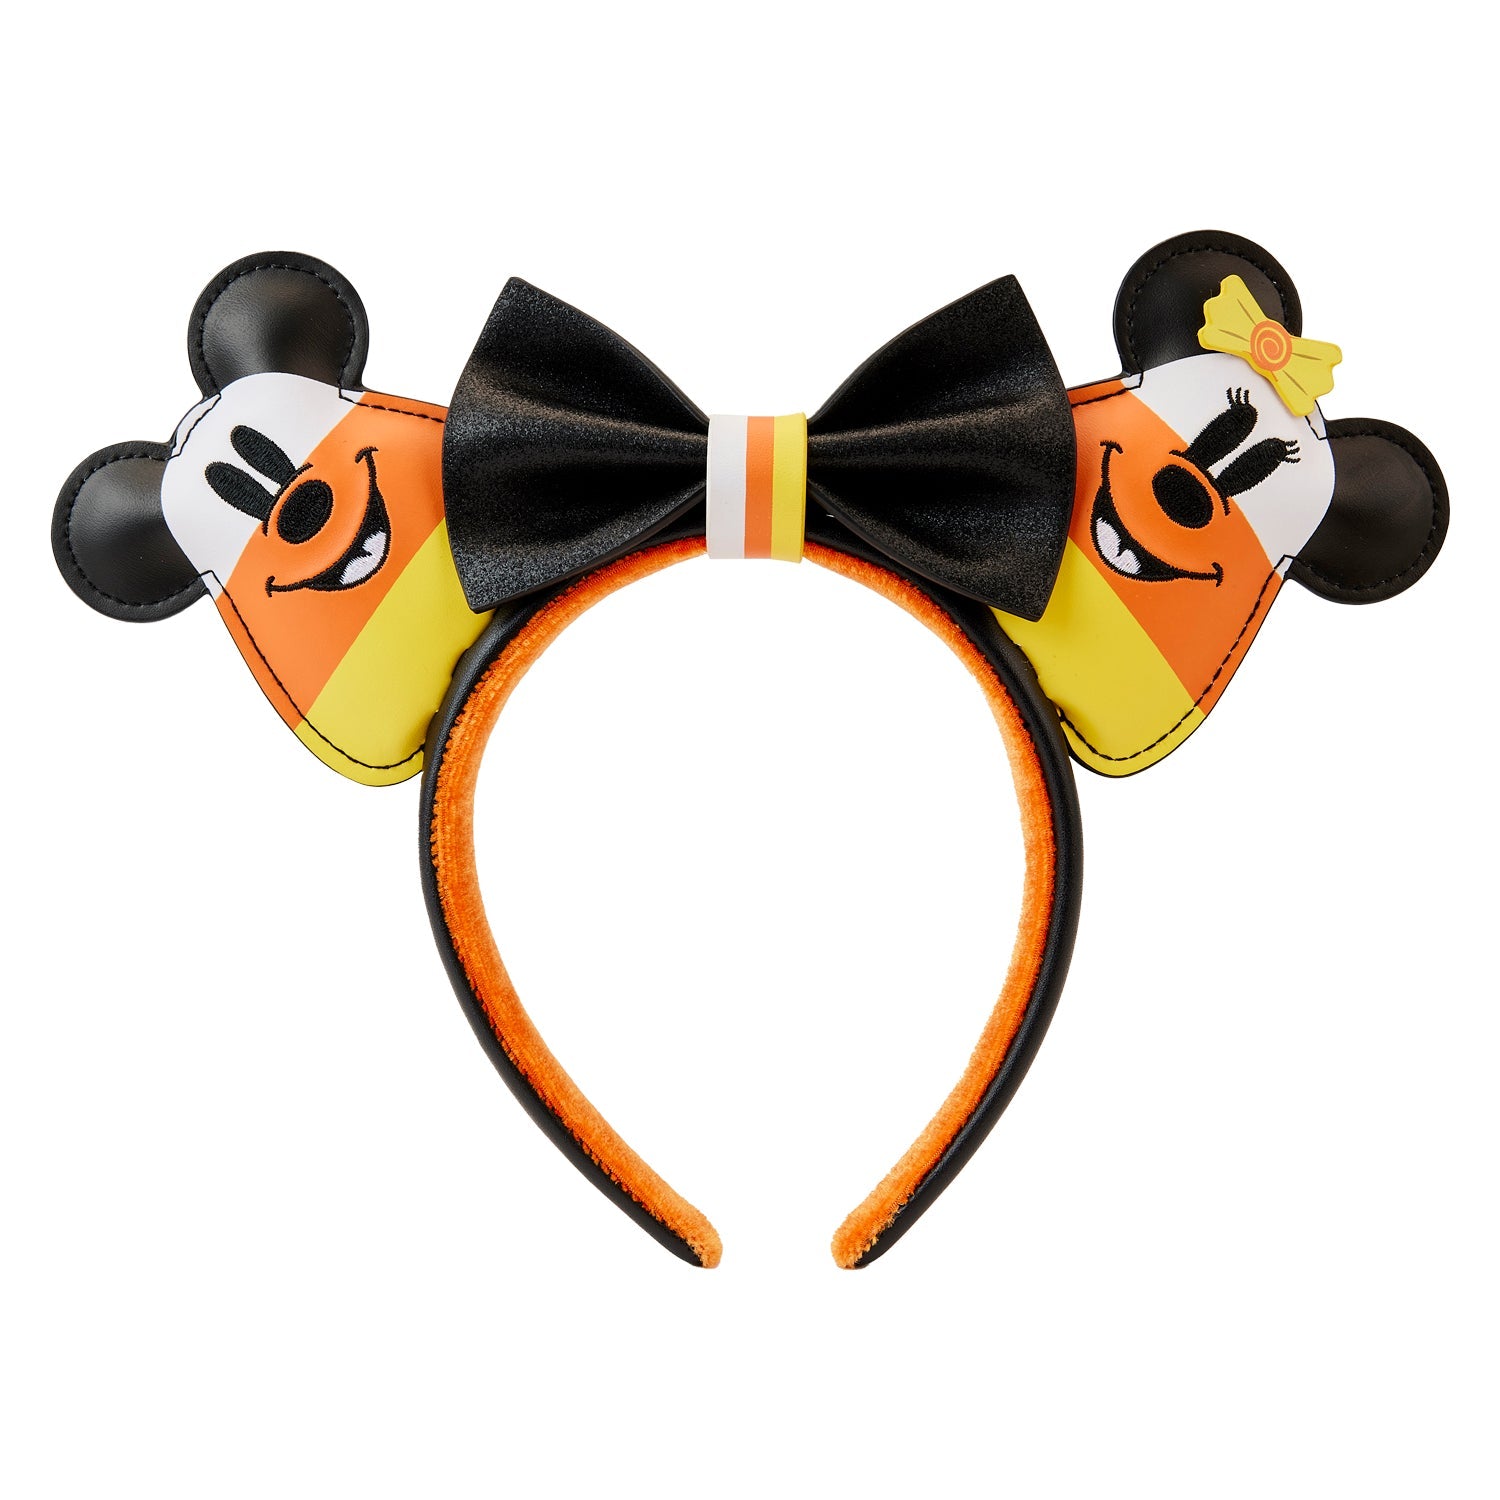 Loungefly x Disney Minnie and Minnie Mouse Candy Corn Ears Headband - GeekCore